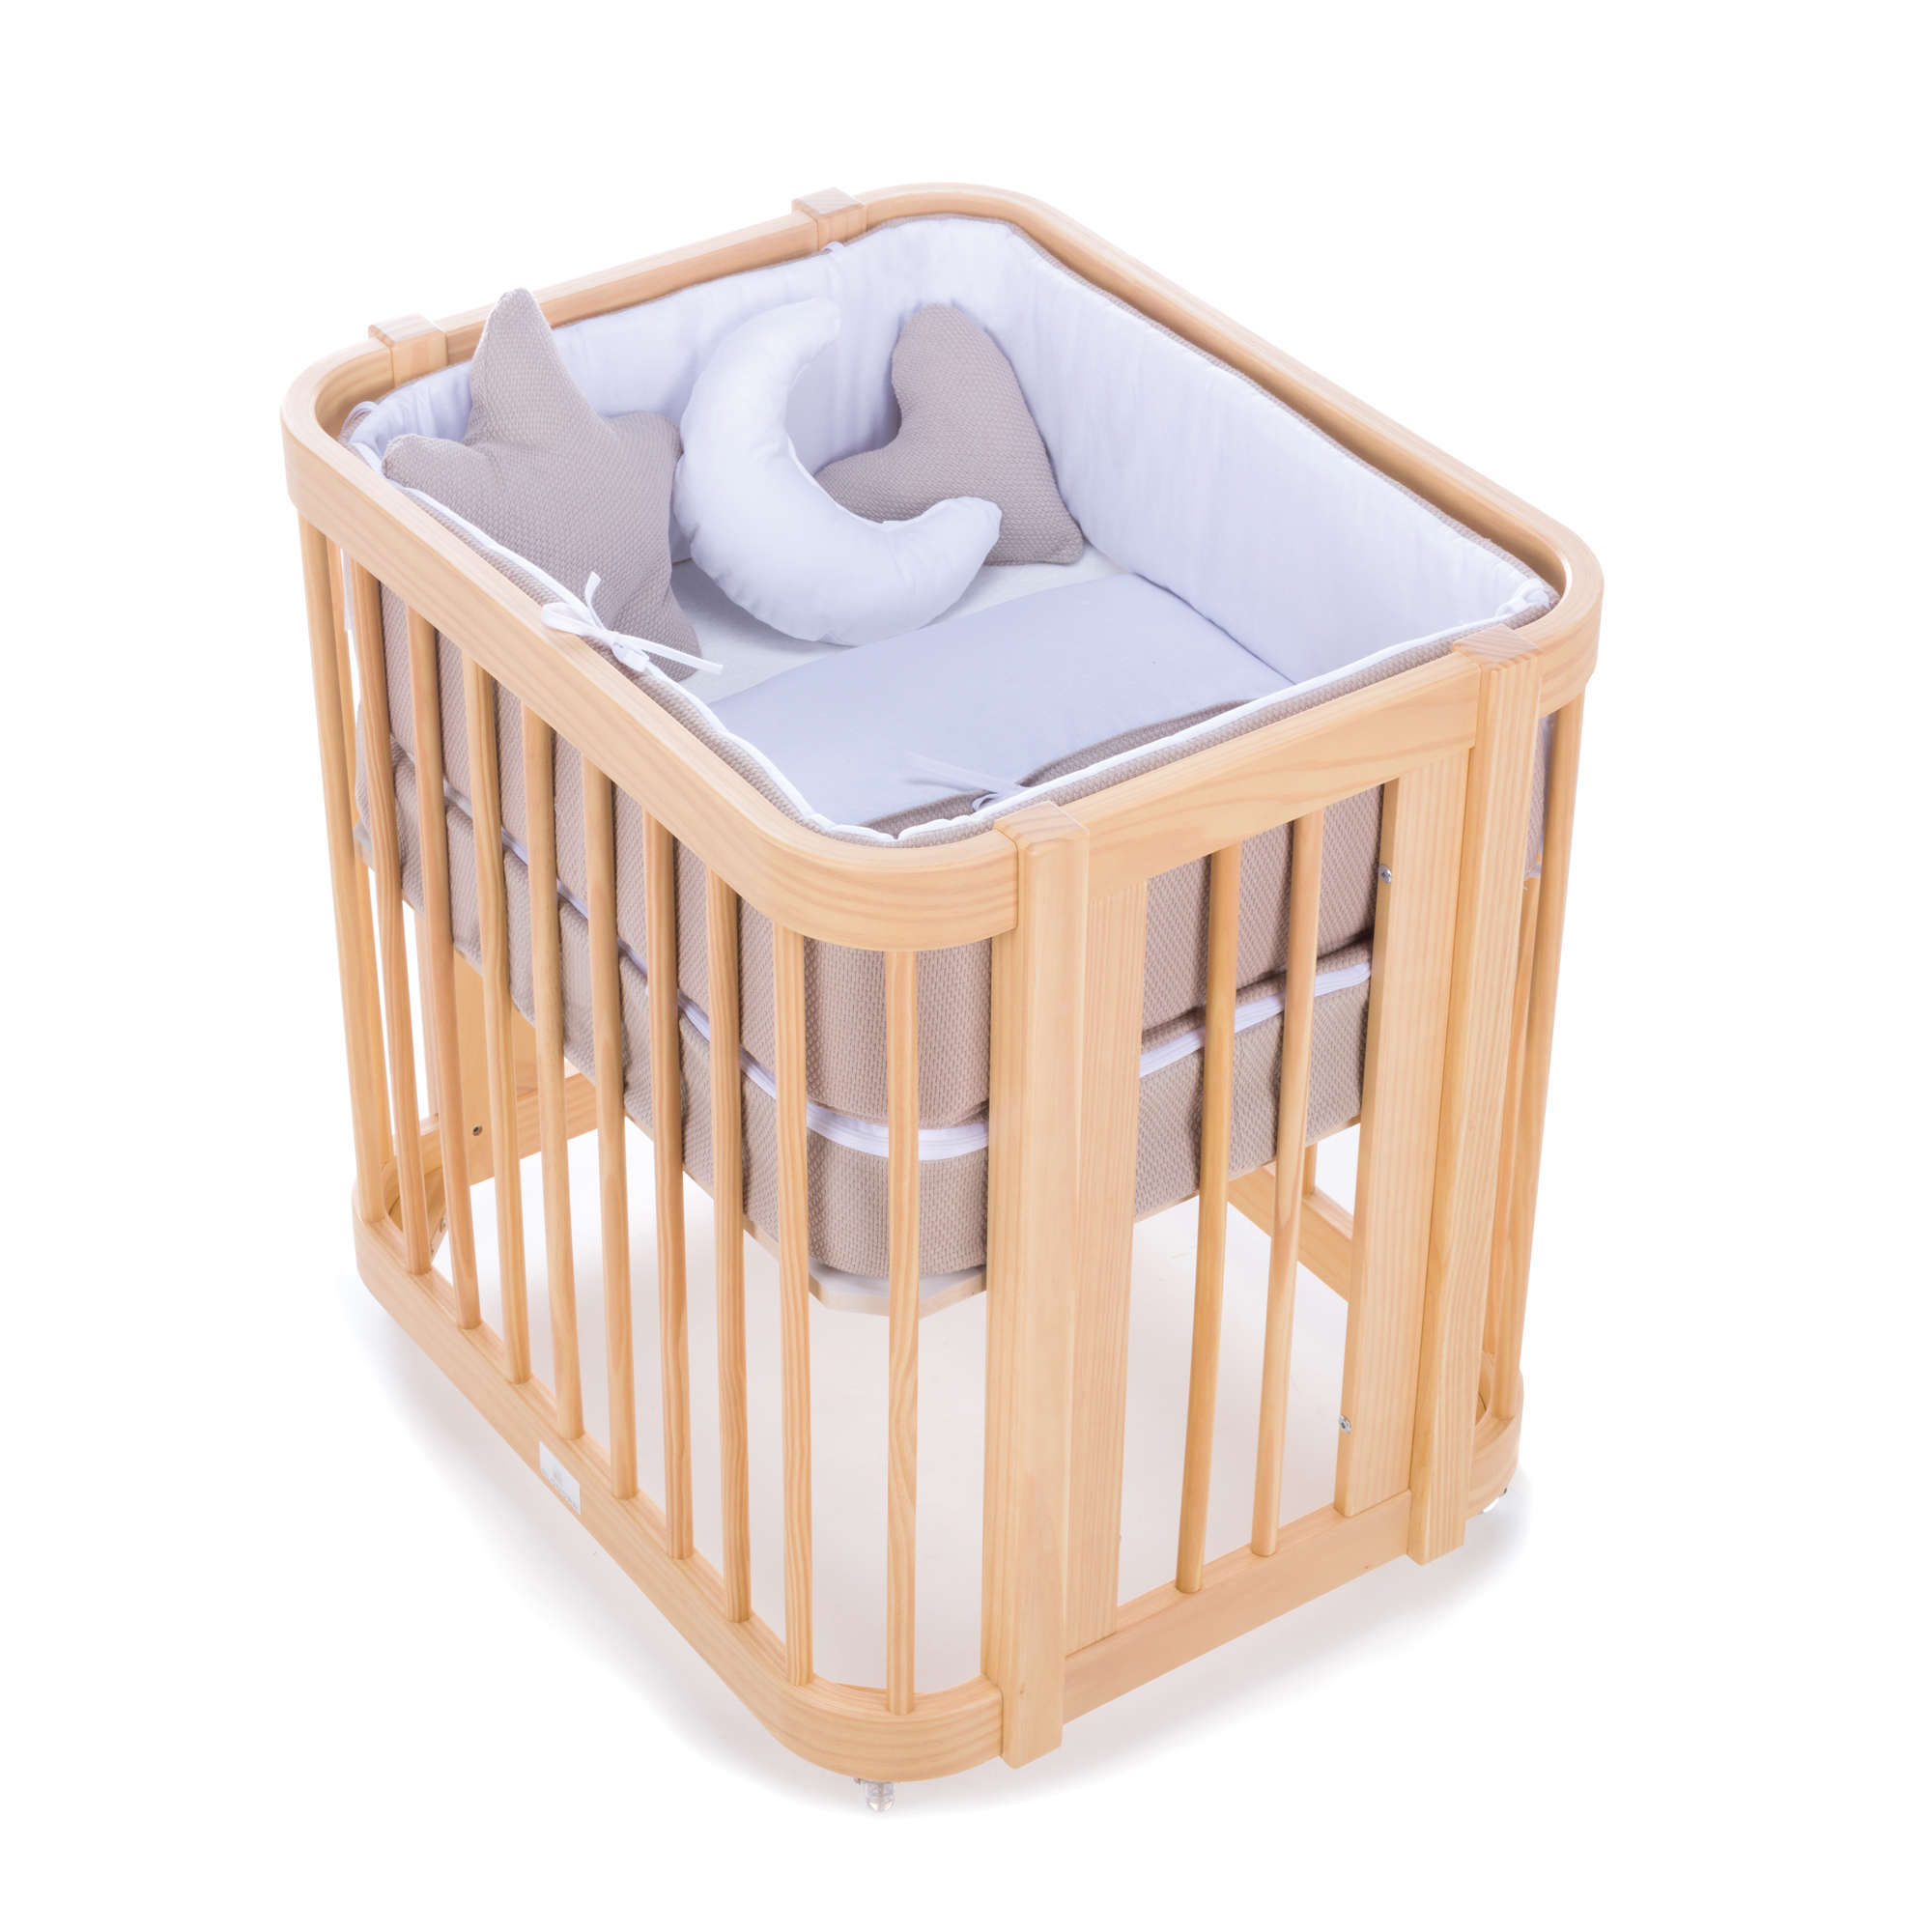 Cot and crib all-in-one